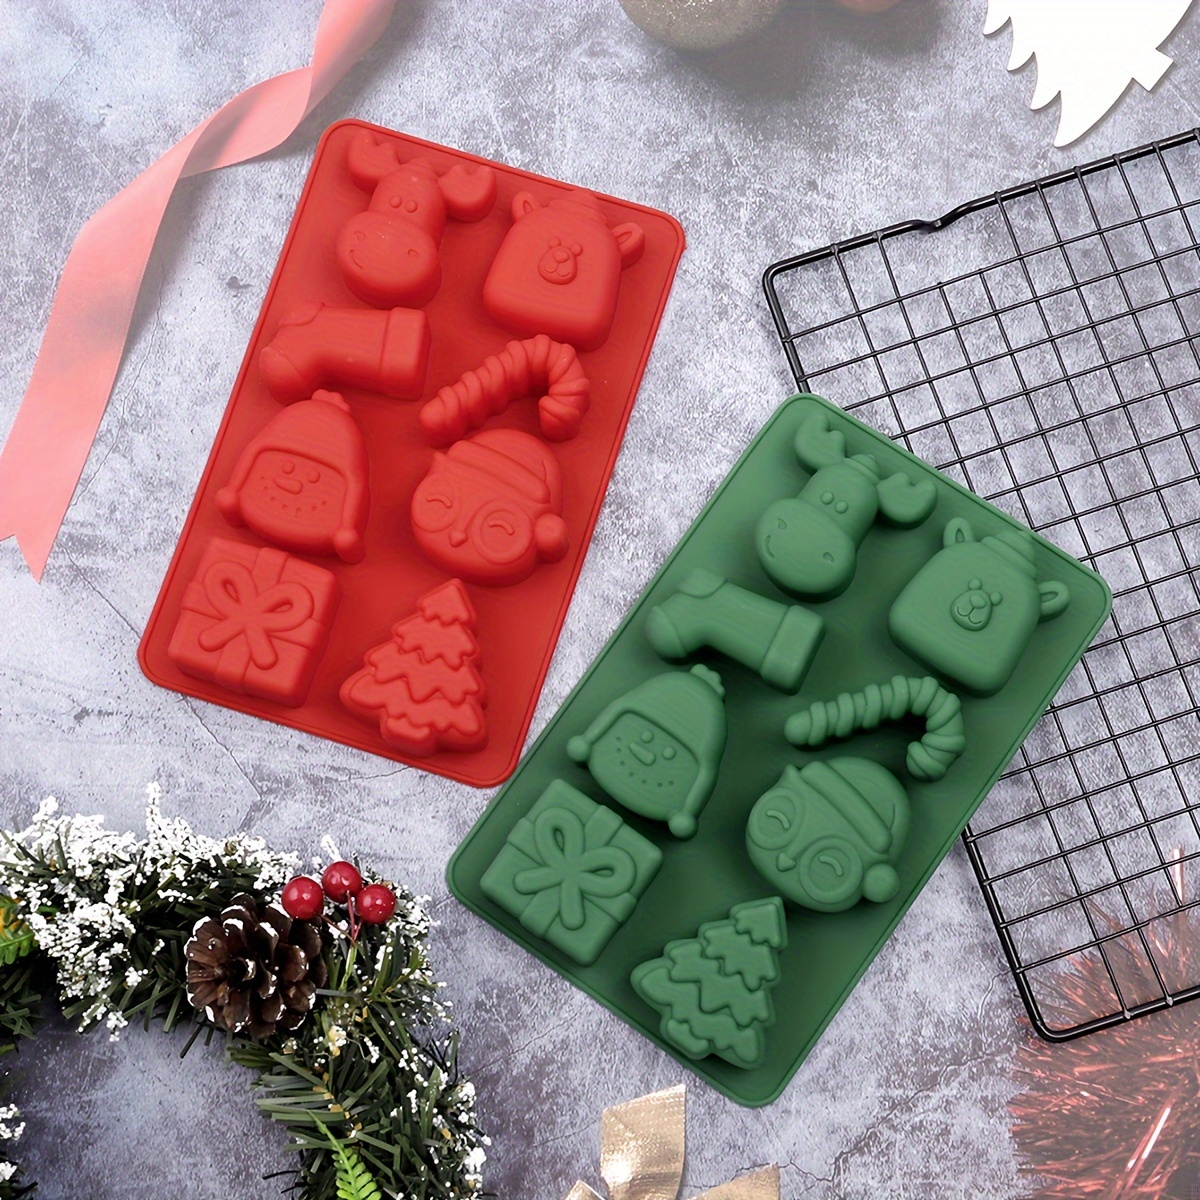 1pc, Christmas Cake Mold, 3D Silicone Mold, Gingerbread Man House Tree  Cookie Mold, Chocolate Mold, For DIY Cake Decorating Tool, Baking Tools,  Kitche